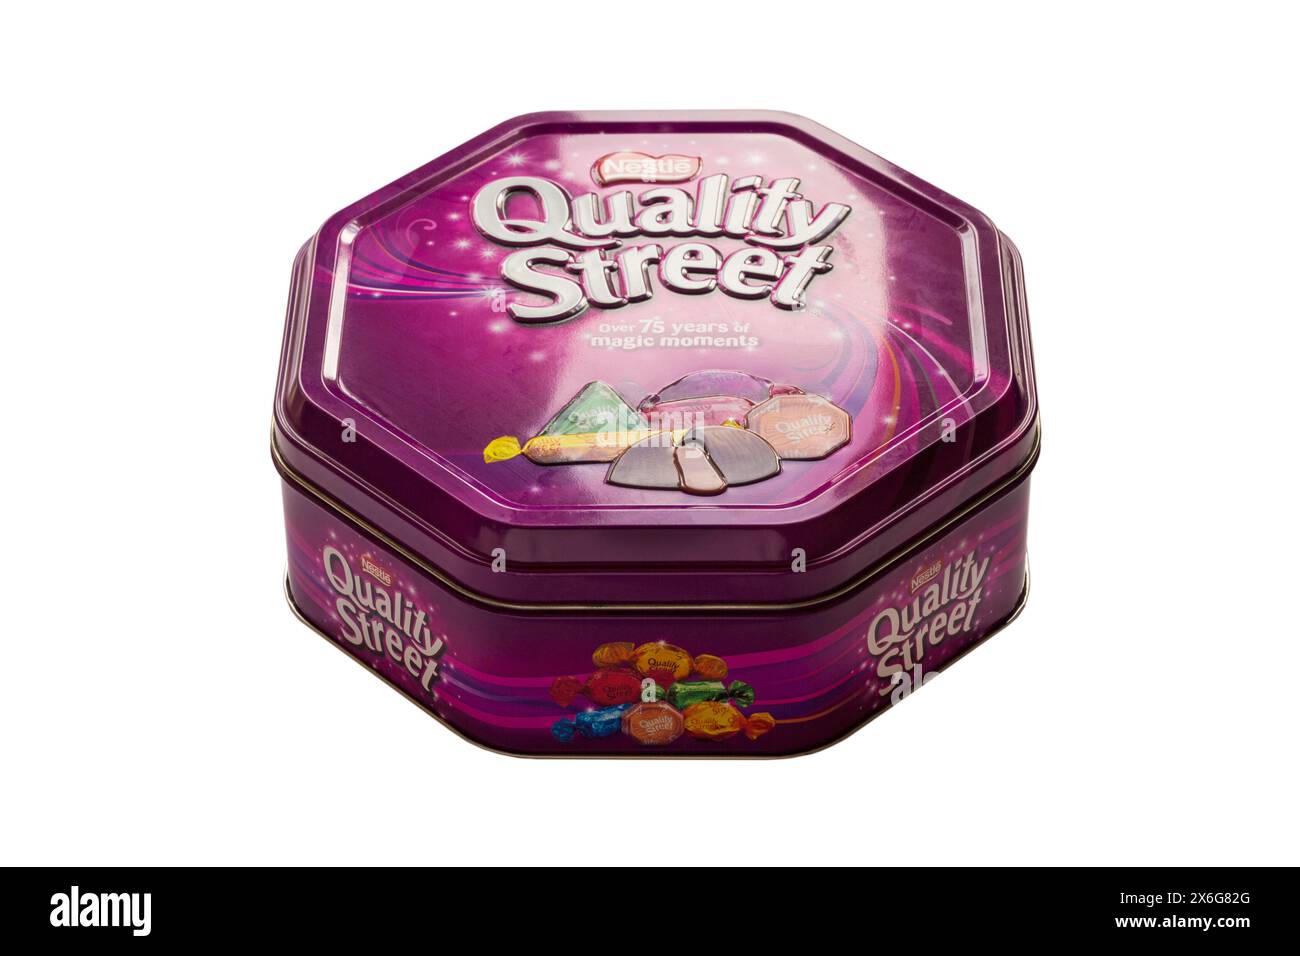 Tin of Nestle Quality Street chocolates sweets metal tin isolated on white background - over 75 years of magic moments Stock Photo